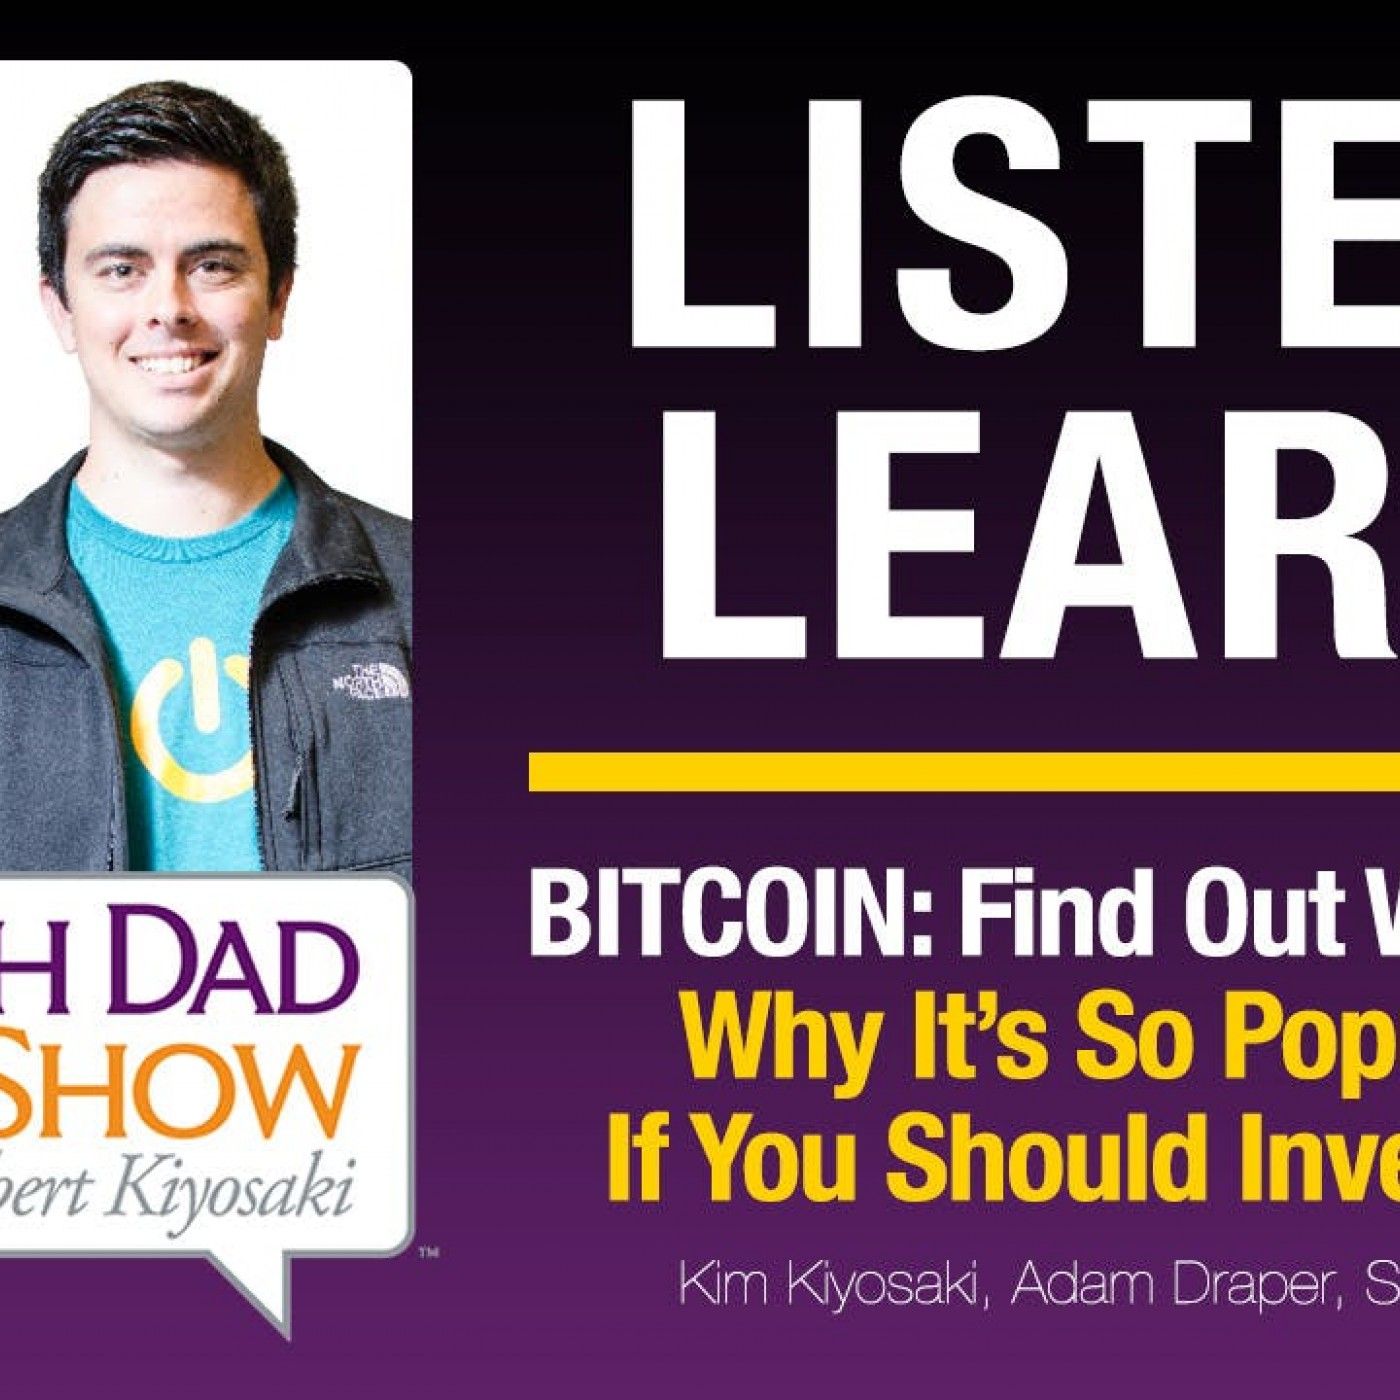 BITCOIN: Find Out What It Is, Why It’s So Popular & If You Should Invest In It – Kim Kiyosaki.